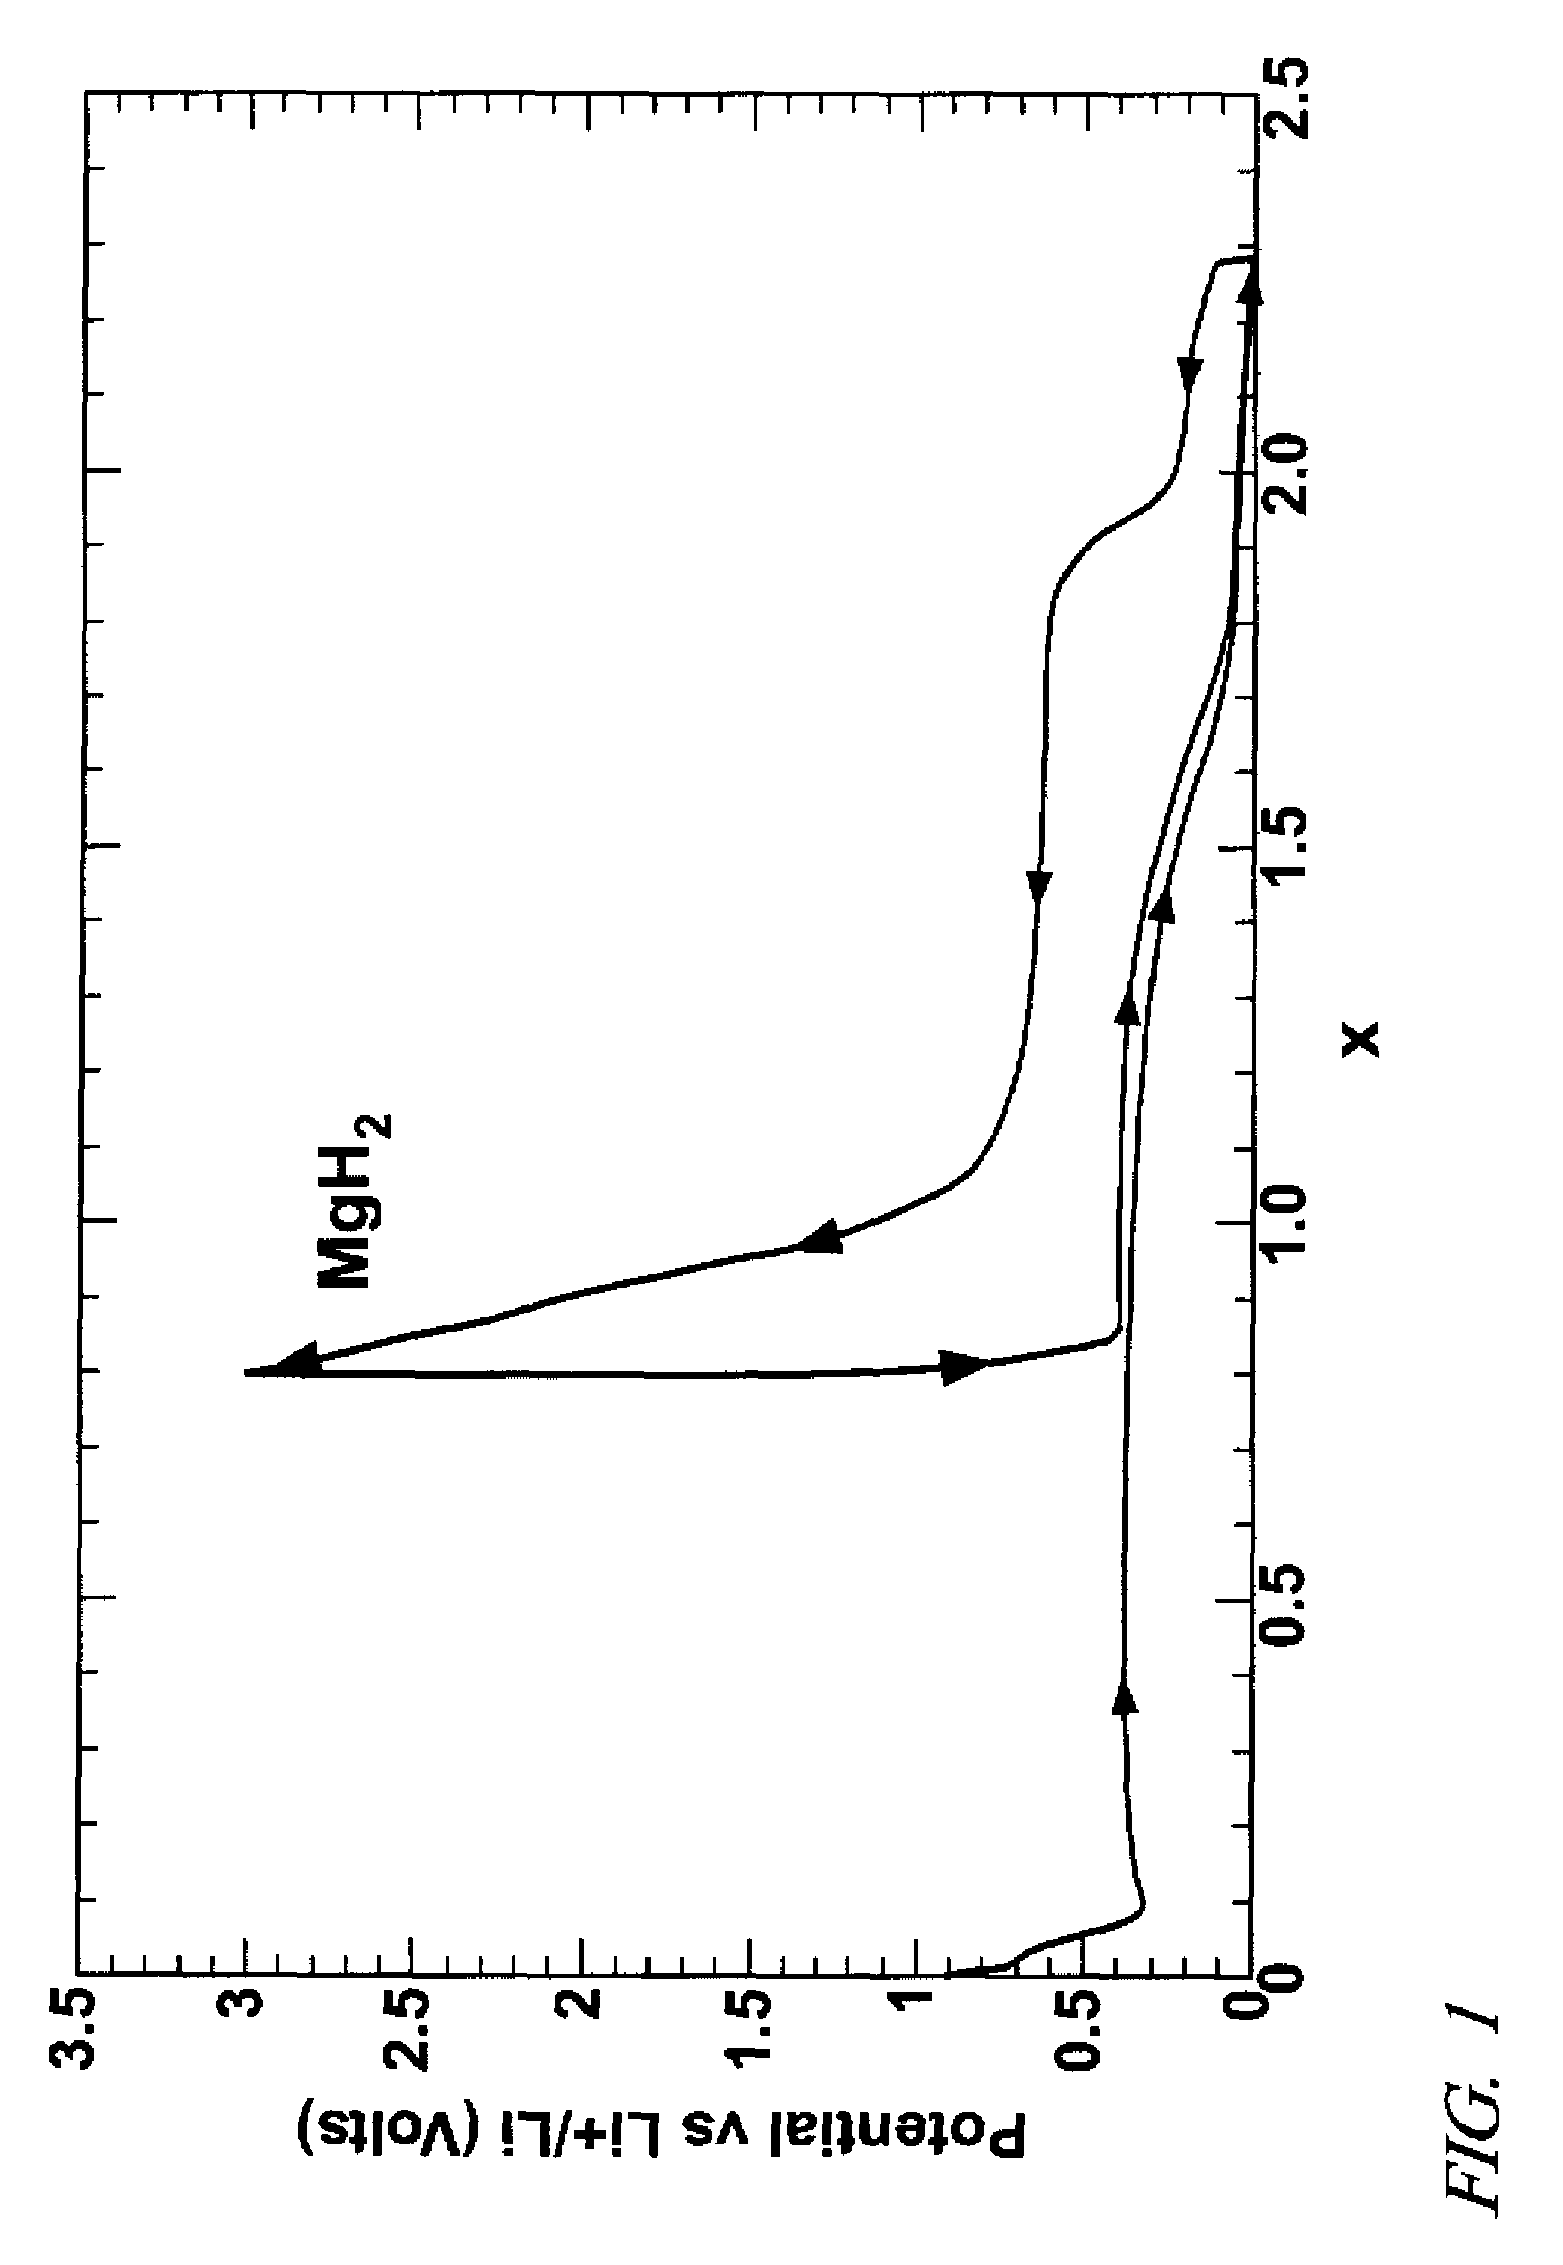 Lithium hydride negative electrode for rechargeable lithium batteries